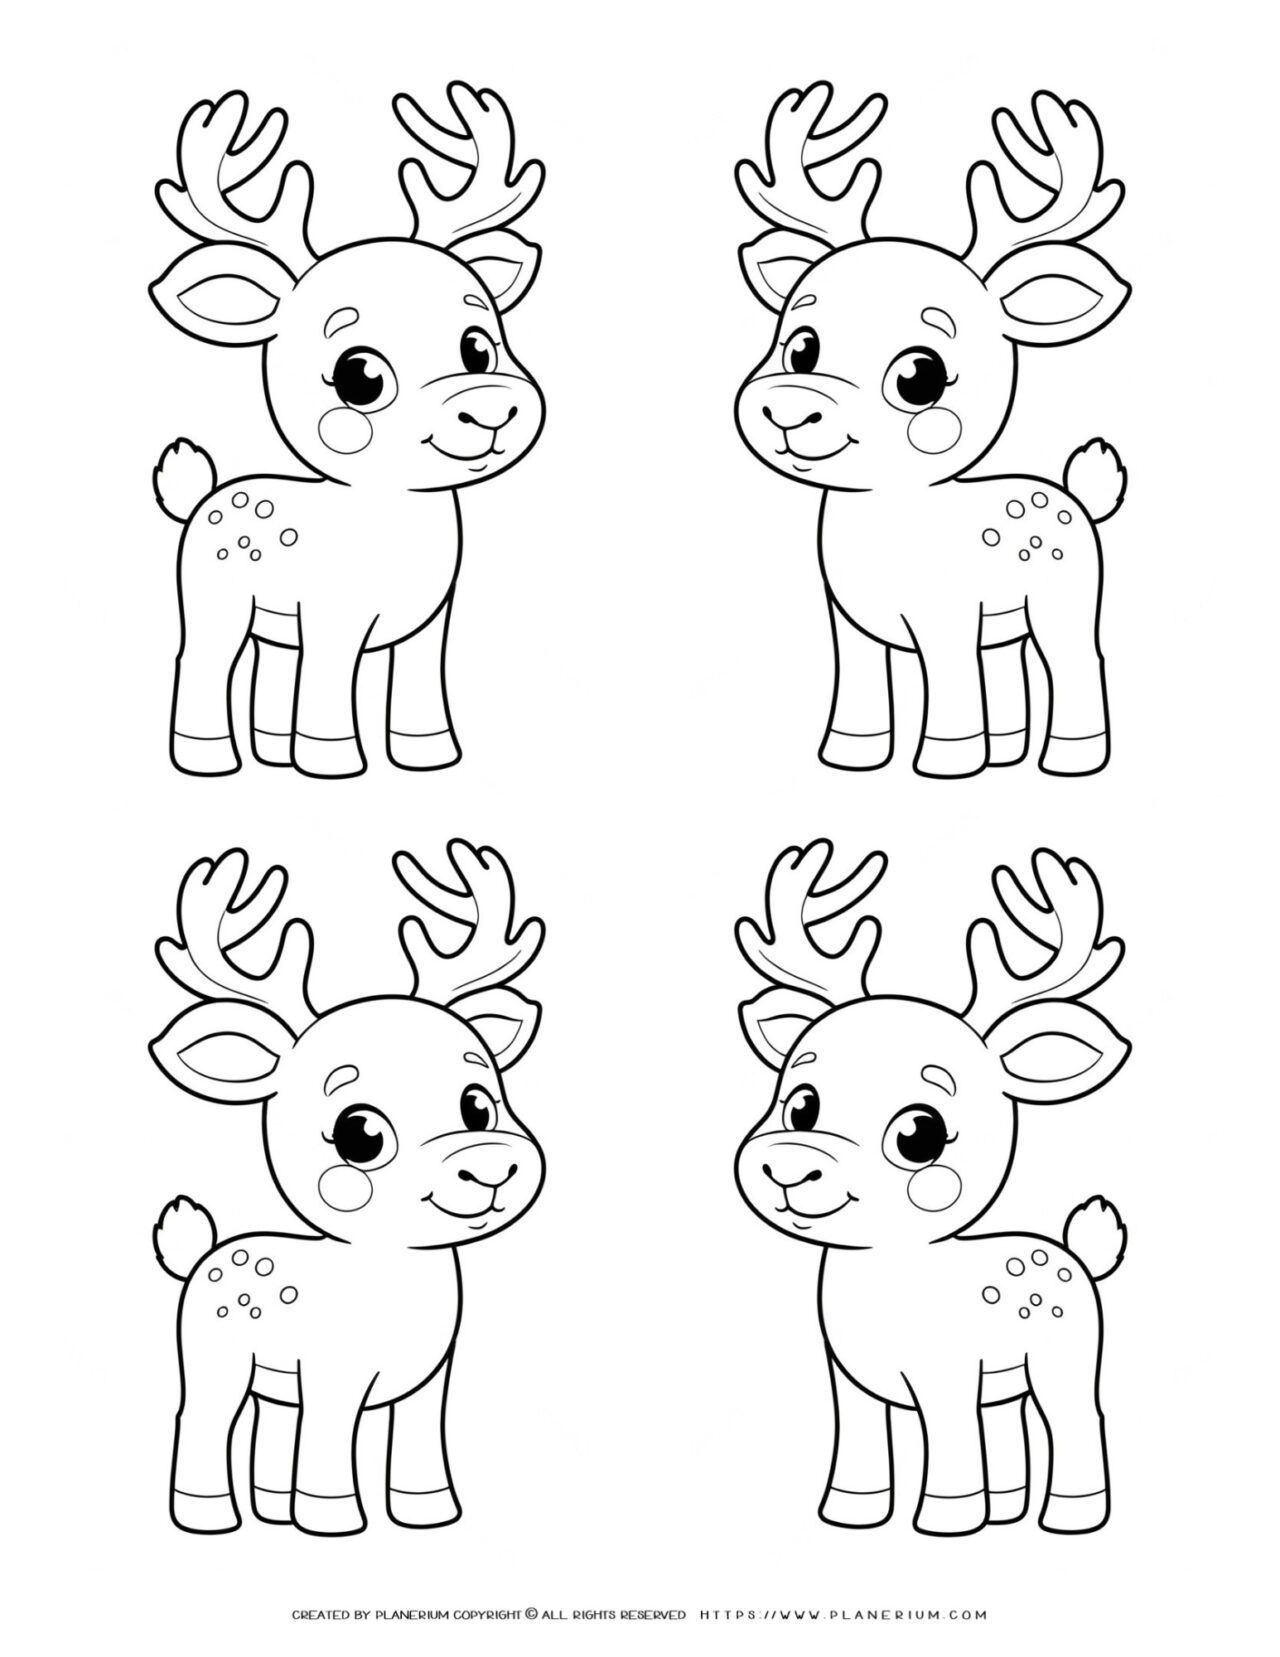 four-cute-reindeer-outlines-coloring-page-for-kids